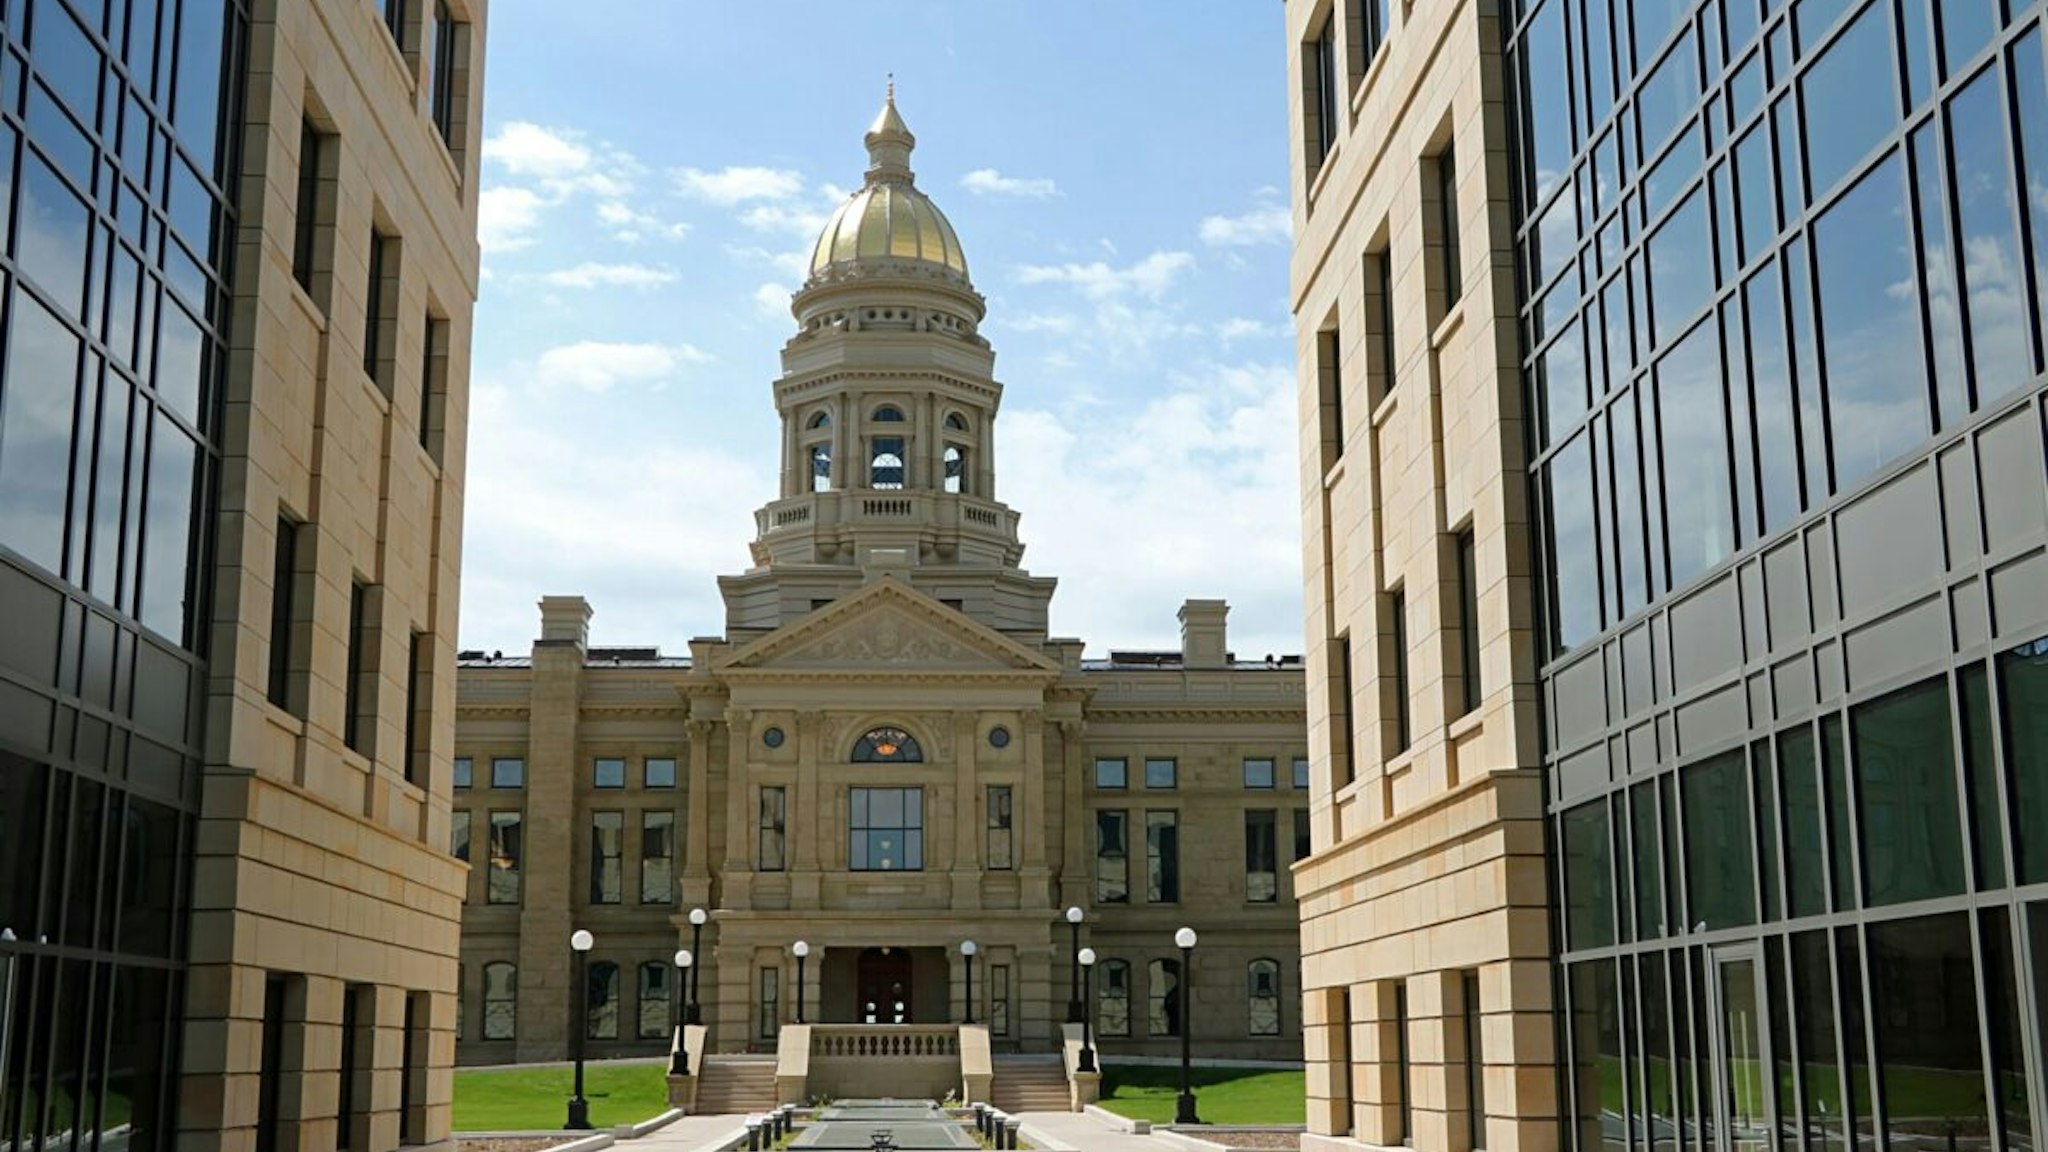 The Wyoming state capitol building is in downtown Cheyenne, the Wyoming state capital.